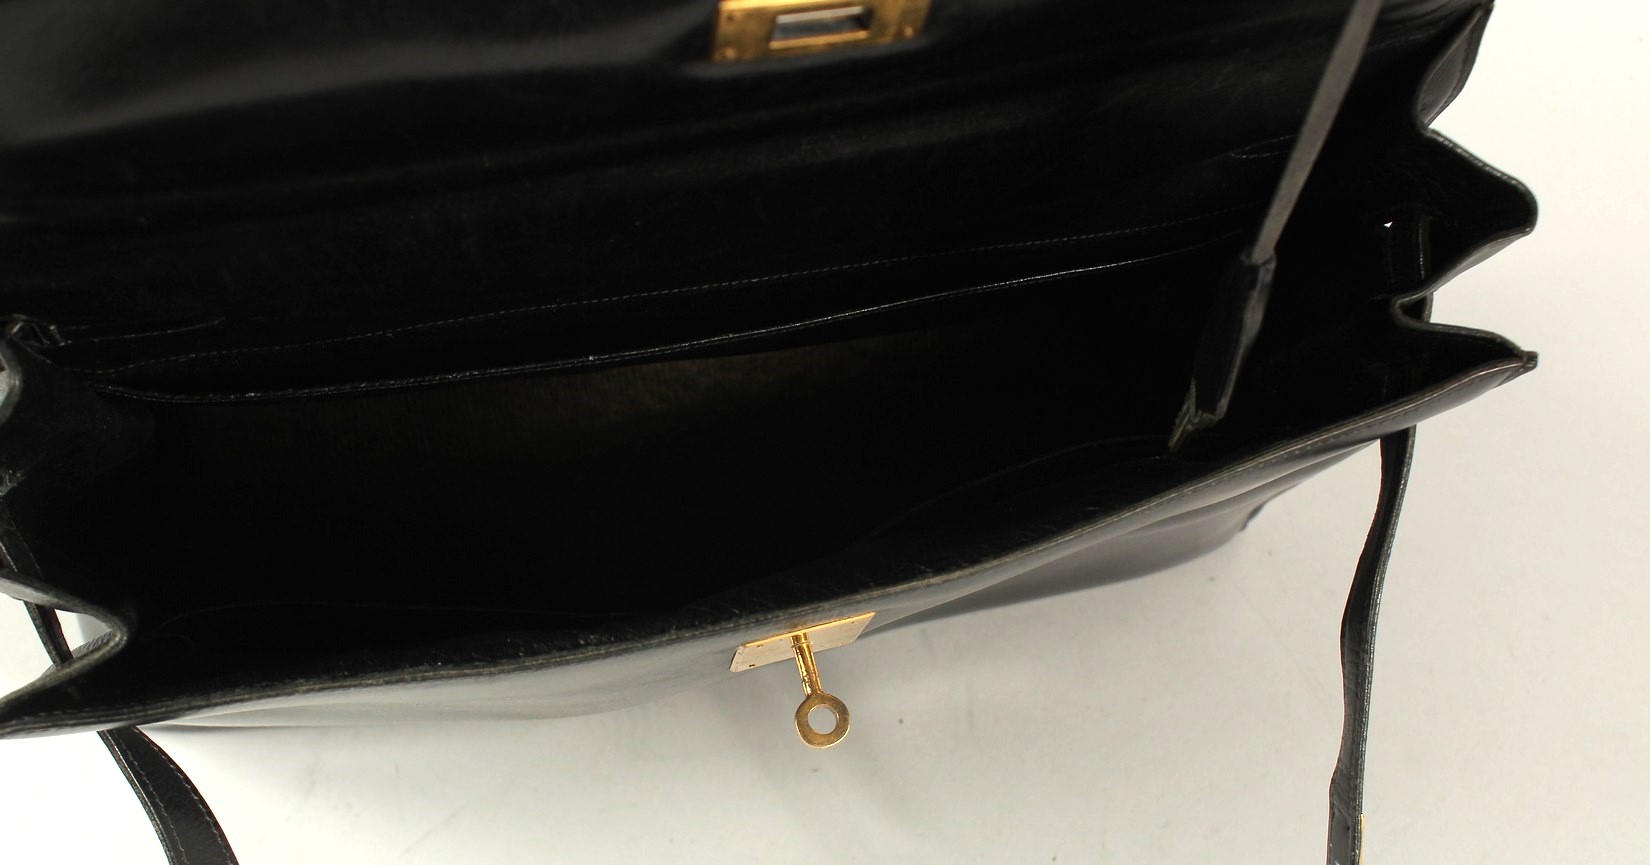 A VERY GOOD VINTAGE HERMES BLACK LEATHER BAG, 1963. 36cms long x 26cms deep x 13cms wide, with a - Image 5 of 7